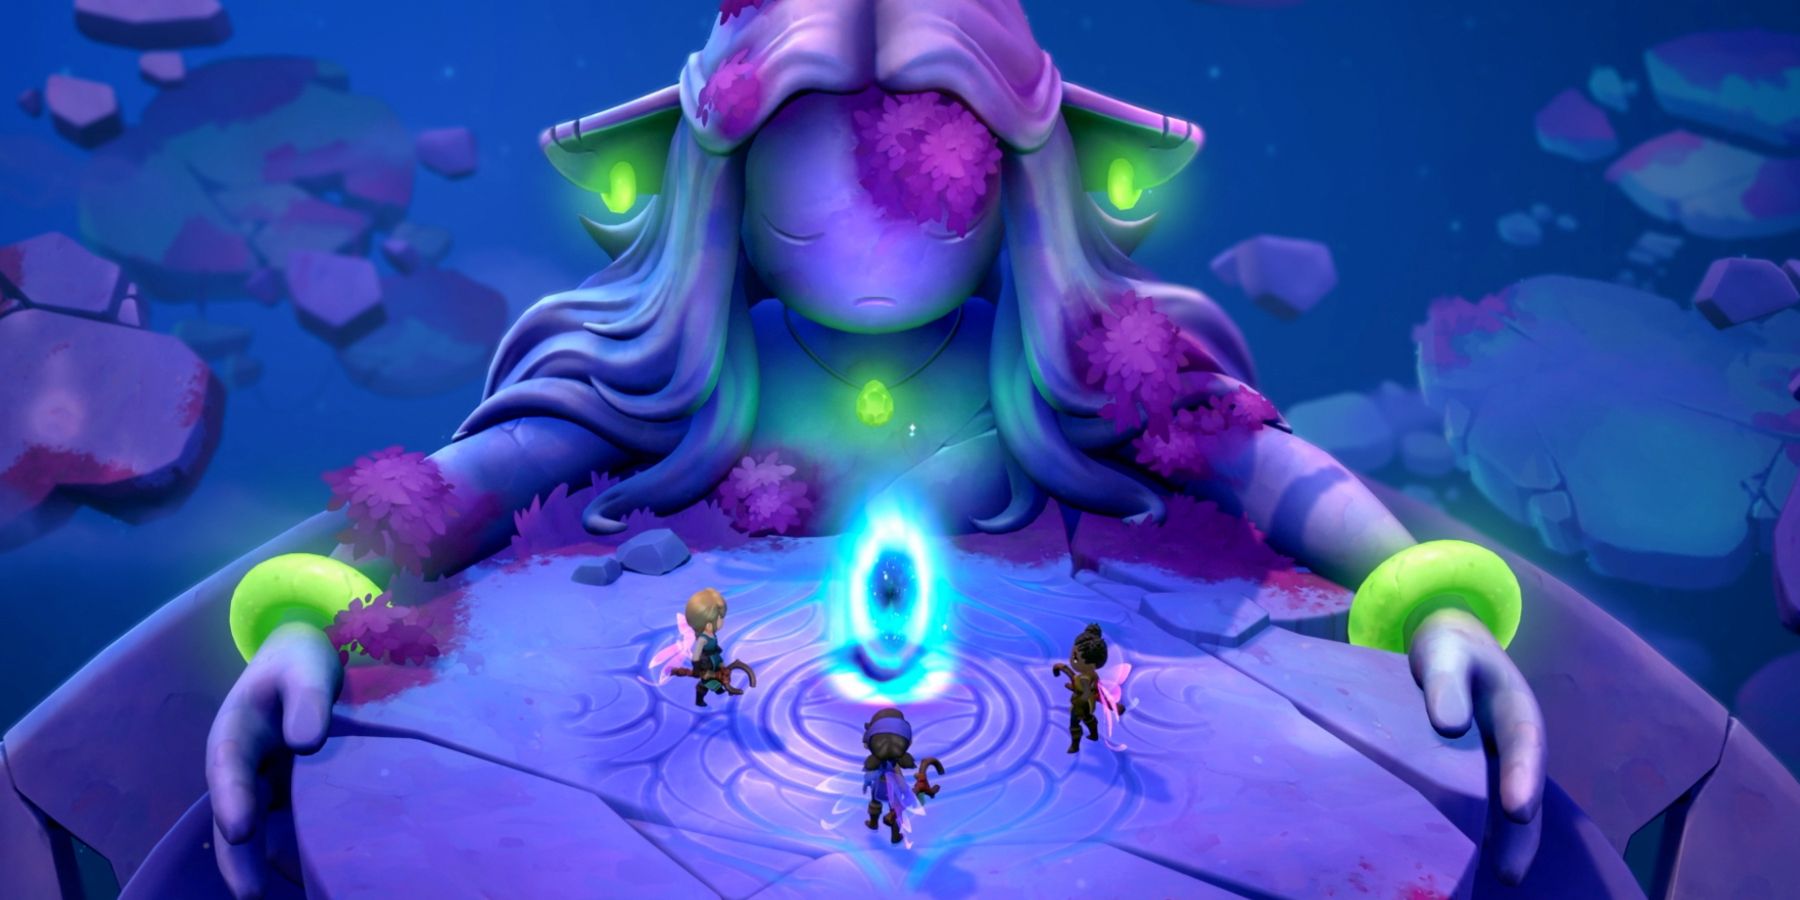 Three players in front of statue with glowing jewelry.